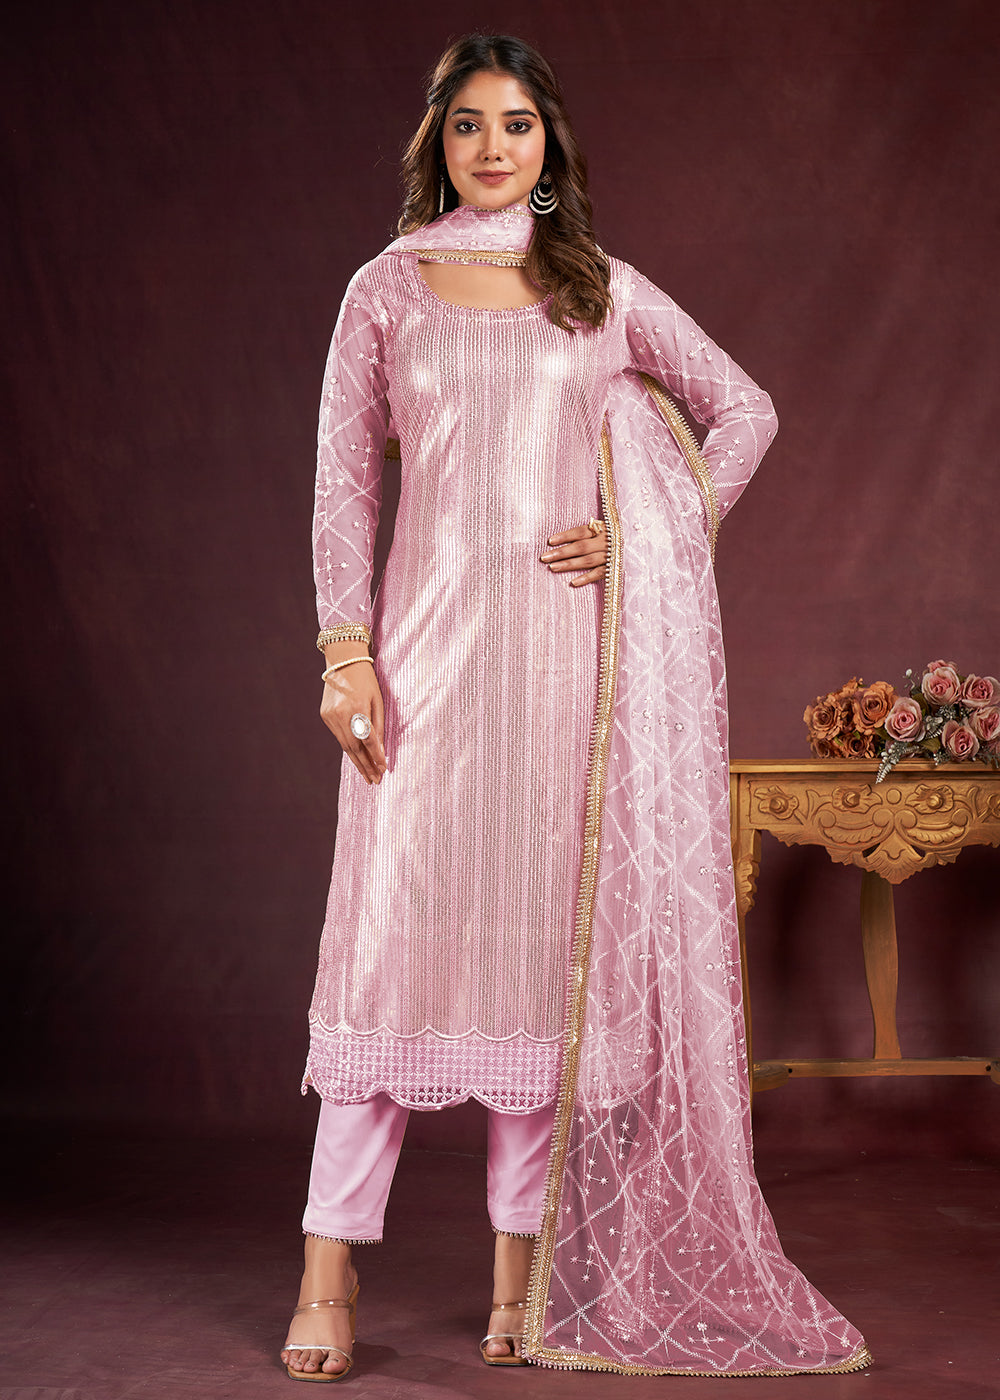 Buy Now Taffy Pink Butterfly Net Embroidered Festive Salwar Suit Online in USA, UK, Canada, Germany, Australia & Worldwide at Empress Clothing.